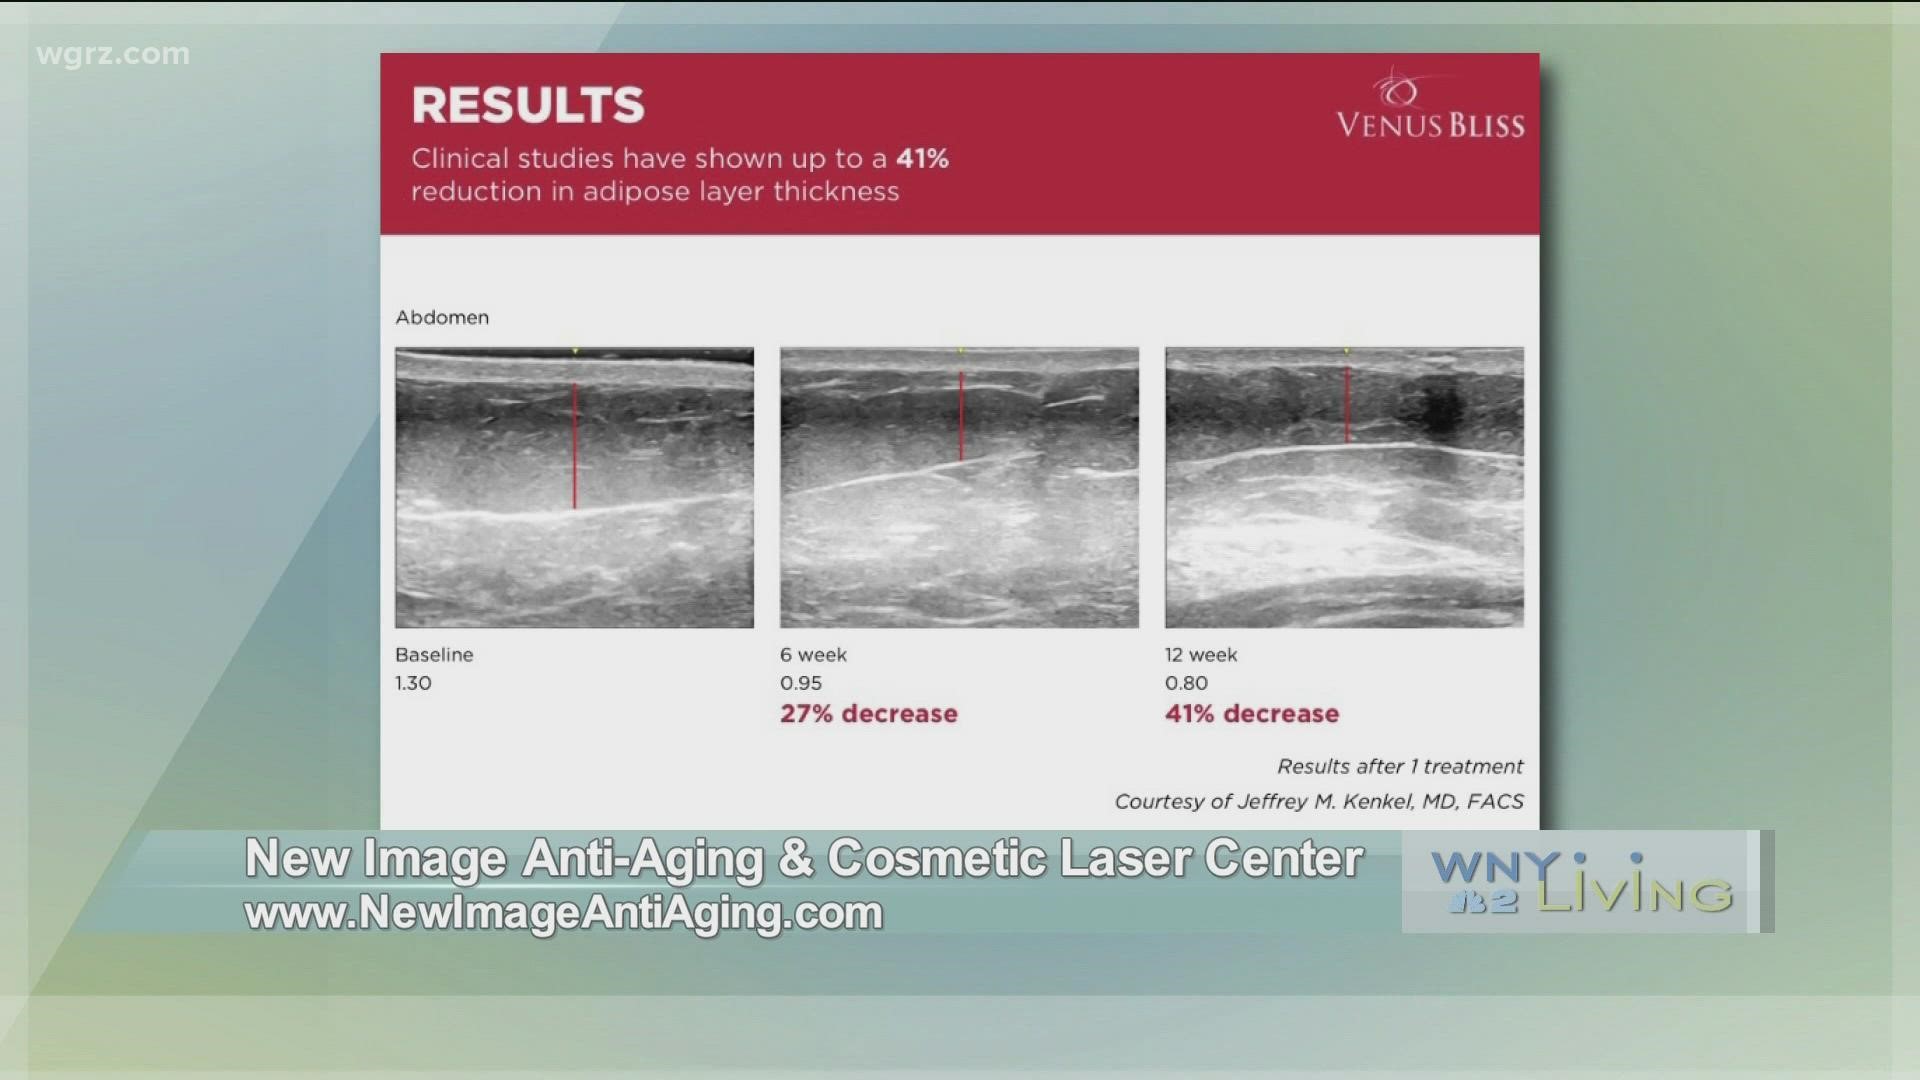 WNY Living - January 22 - New Image Anti-Aging & Cosmetic Laser Center (THIS VIDEO IS SPONSORED BY NEW IMAGE ANTI-AGING & COSMETIC LASER CENTER)